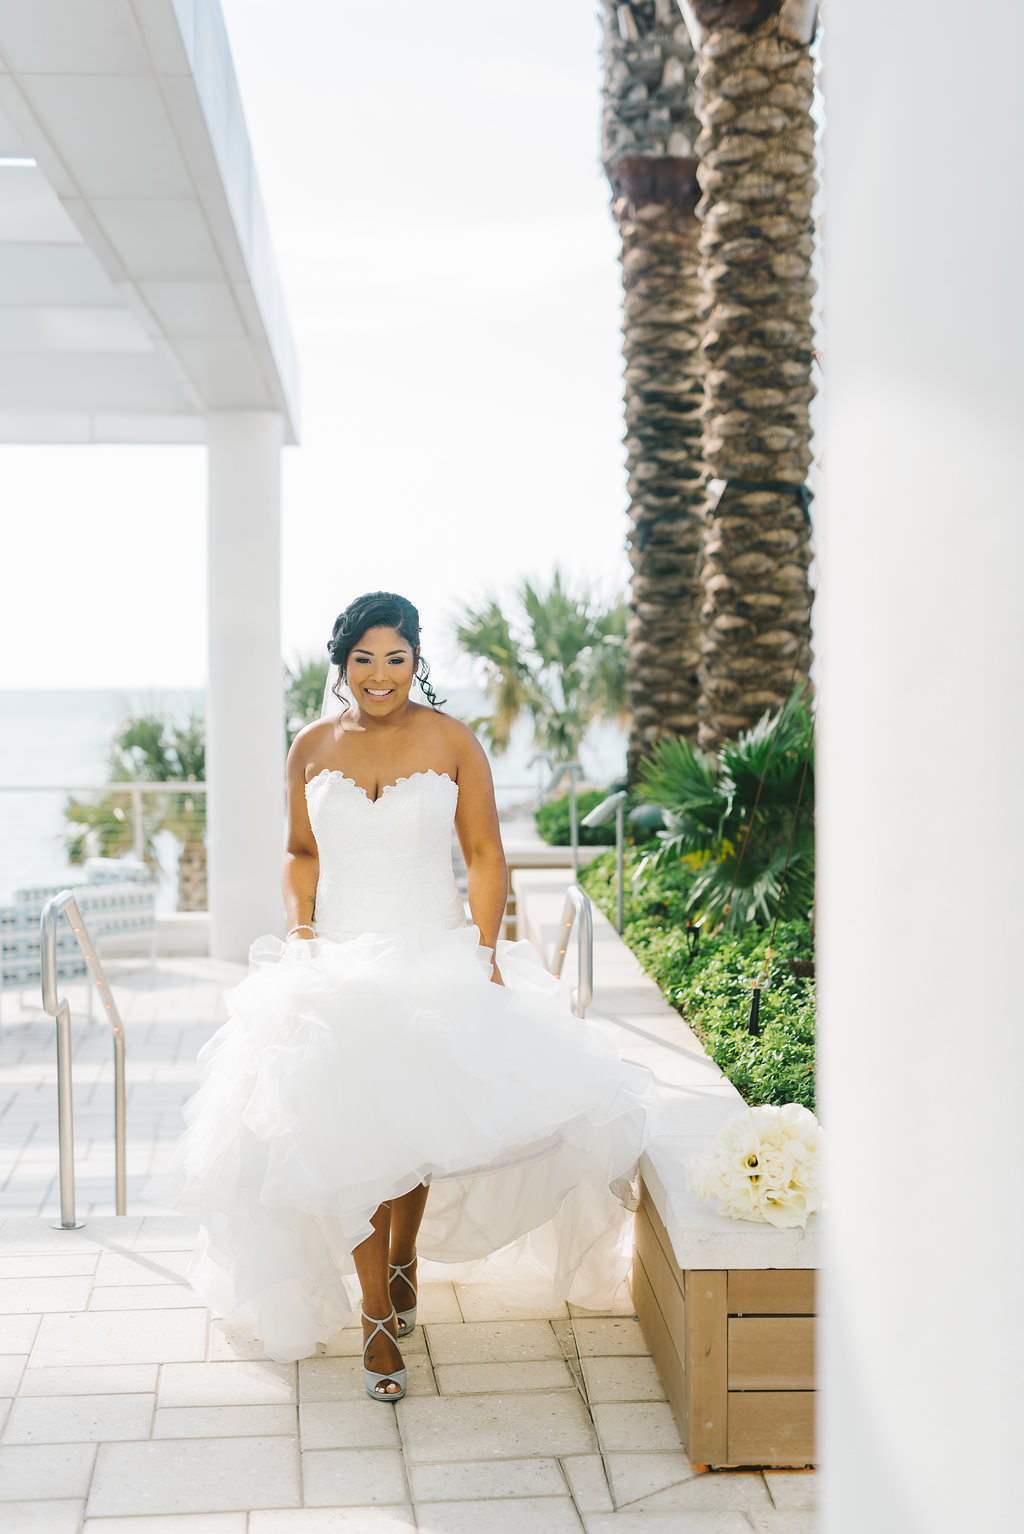 Outdoor Florida Bride Wedding Portrait, Sweetheart Strapless Beaded Mermaid and Tulle Wedding Dress and Glitter Silver Strappy Wedding Shoes | Tampa Bay Wedding Photographer Kera Photography